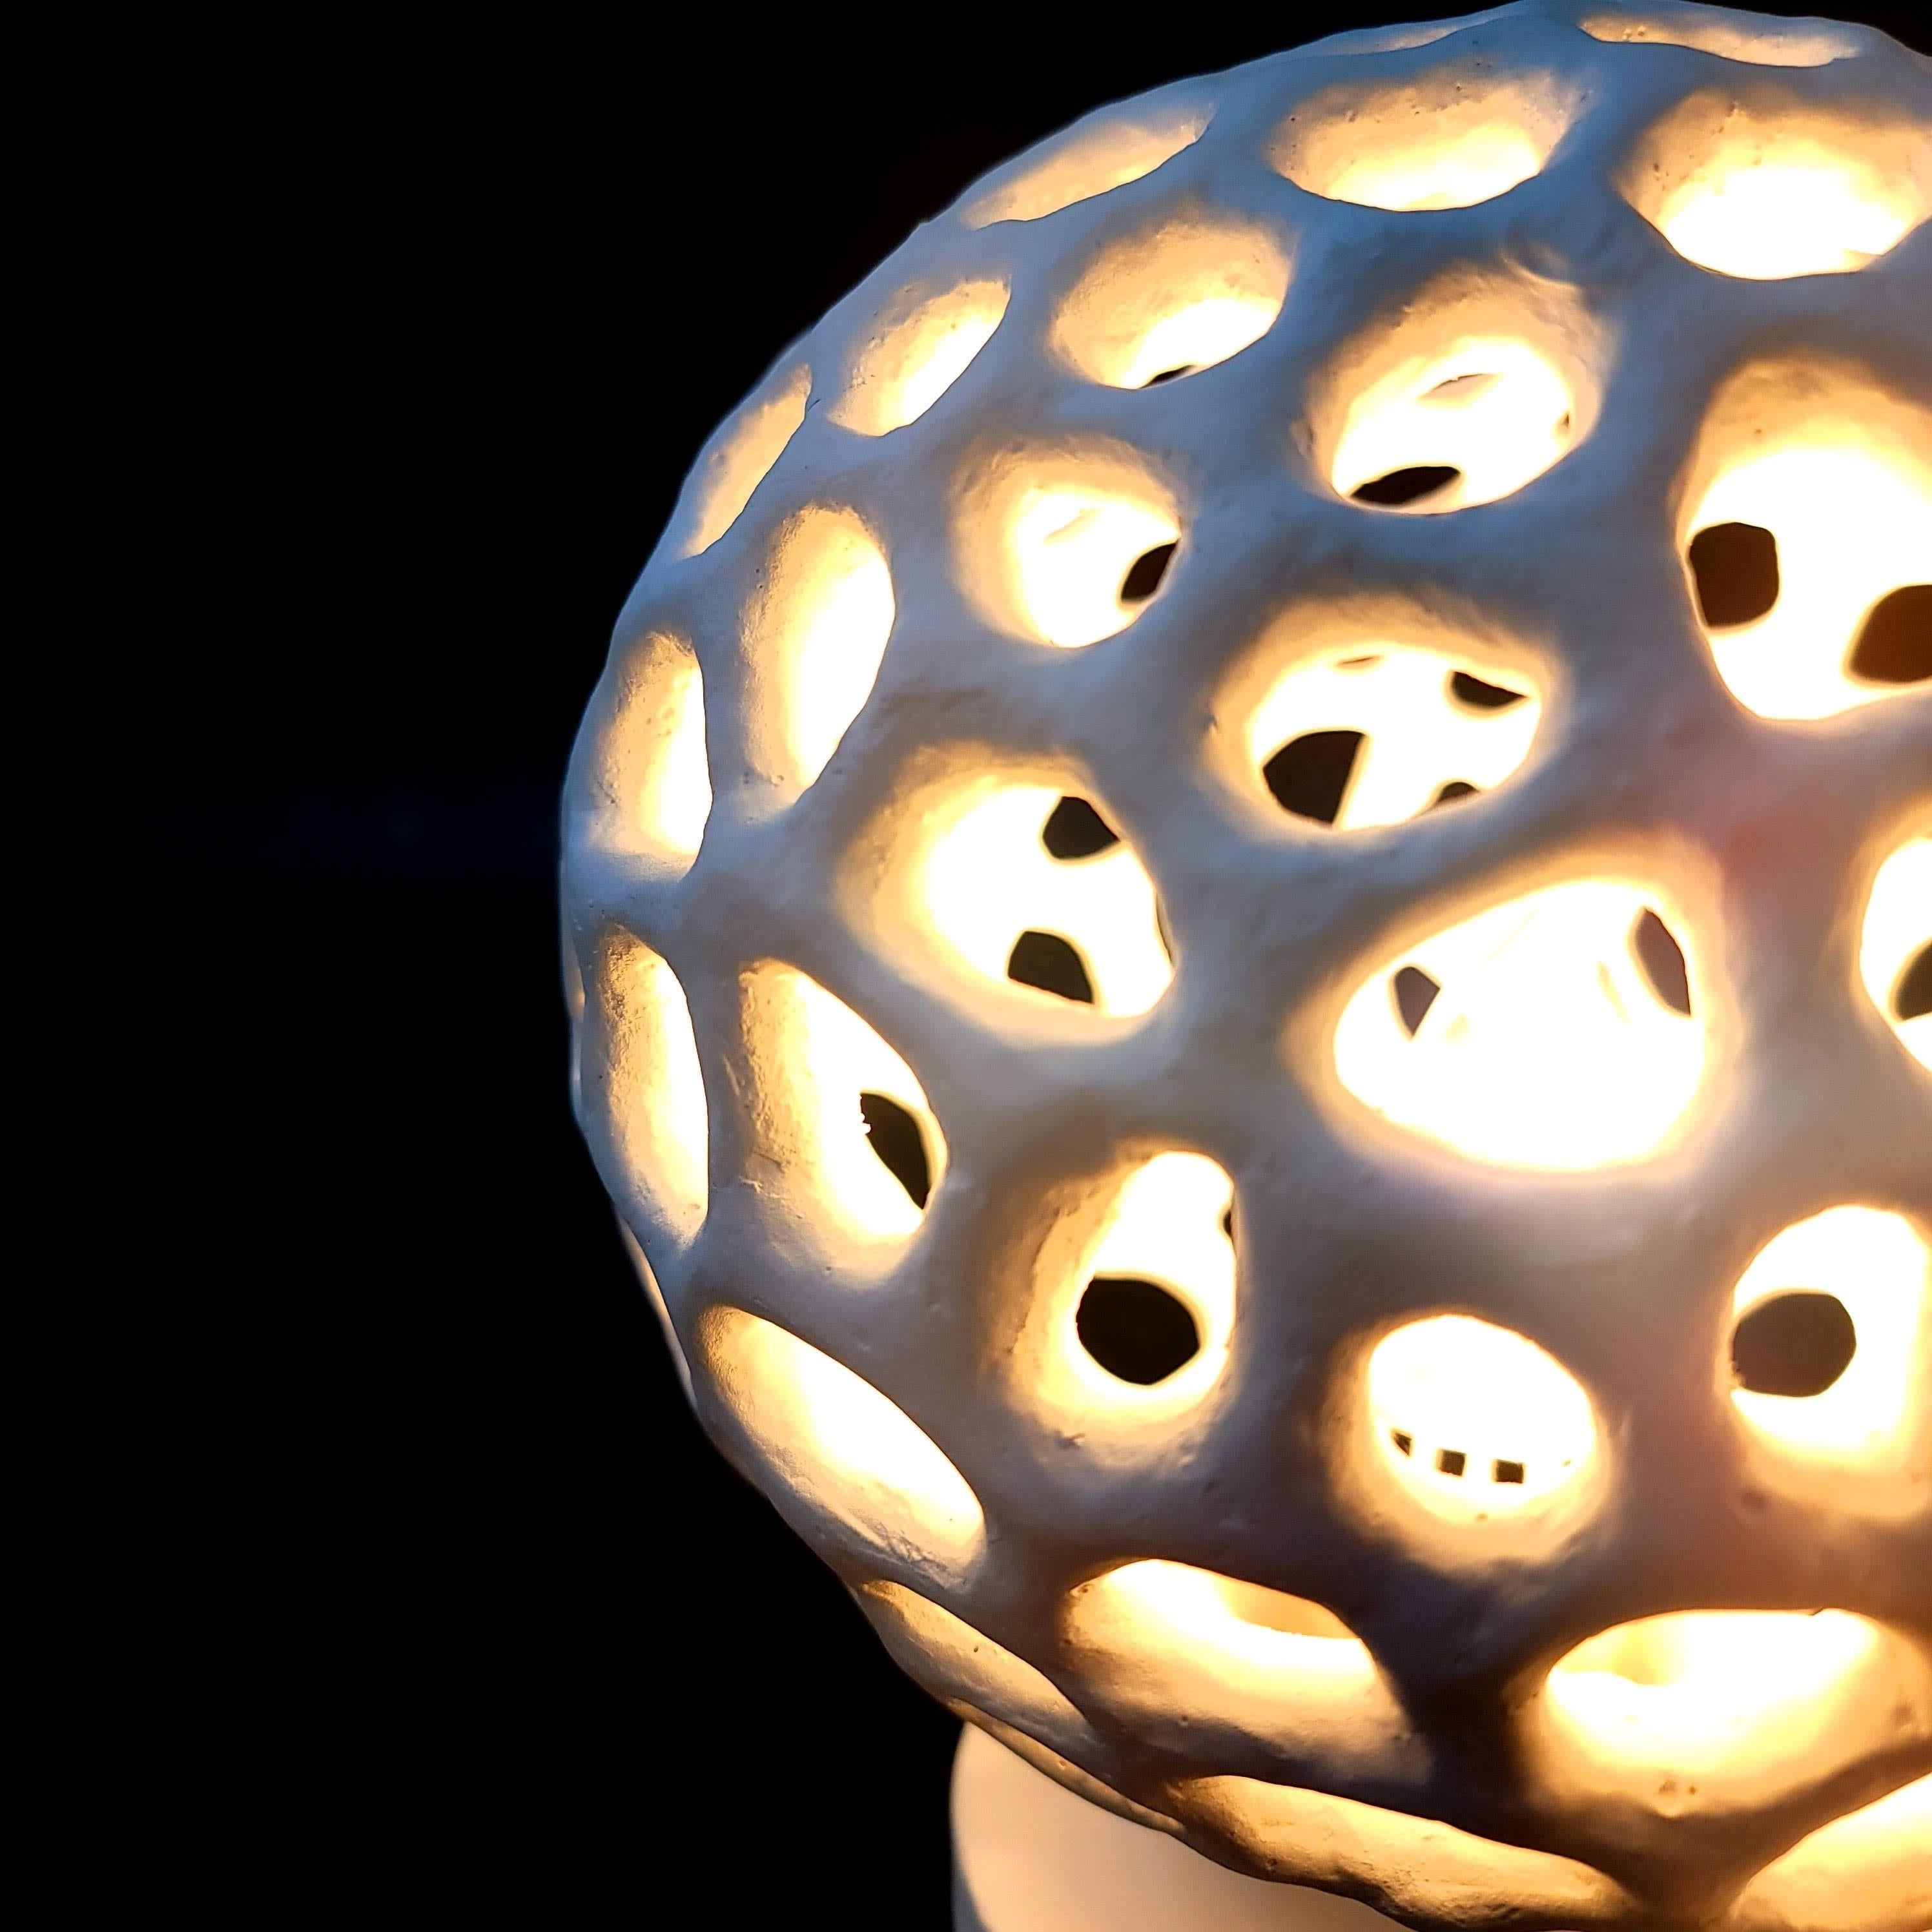 Our Artisanal Voronoi Sphere Ambient Table Light is a celebration of nature's intricate beauty and the charm of geometry. Inspired by the complex patterns, this lamp is a work of art that brings the wonders of the nature into your home.

Expertly